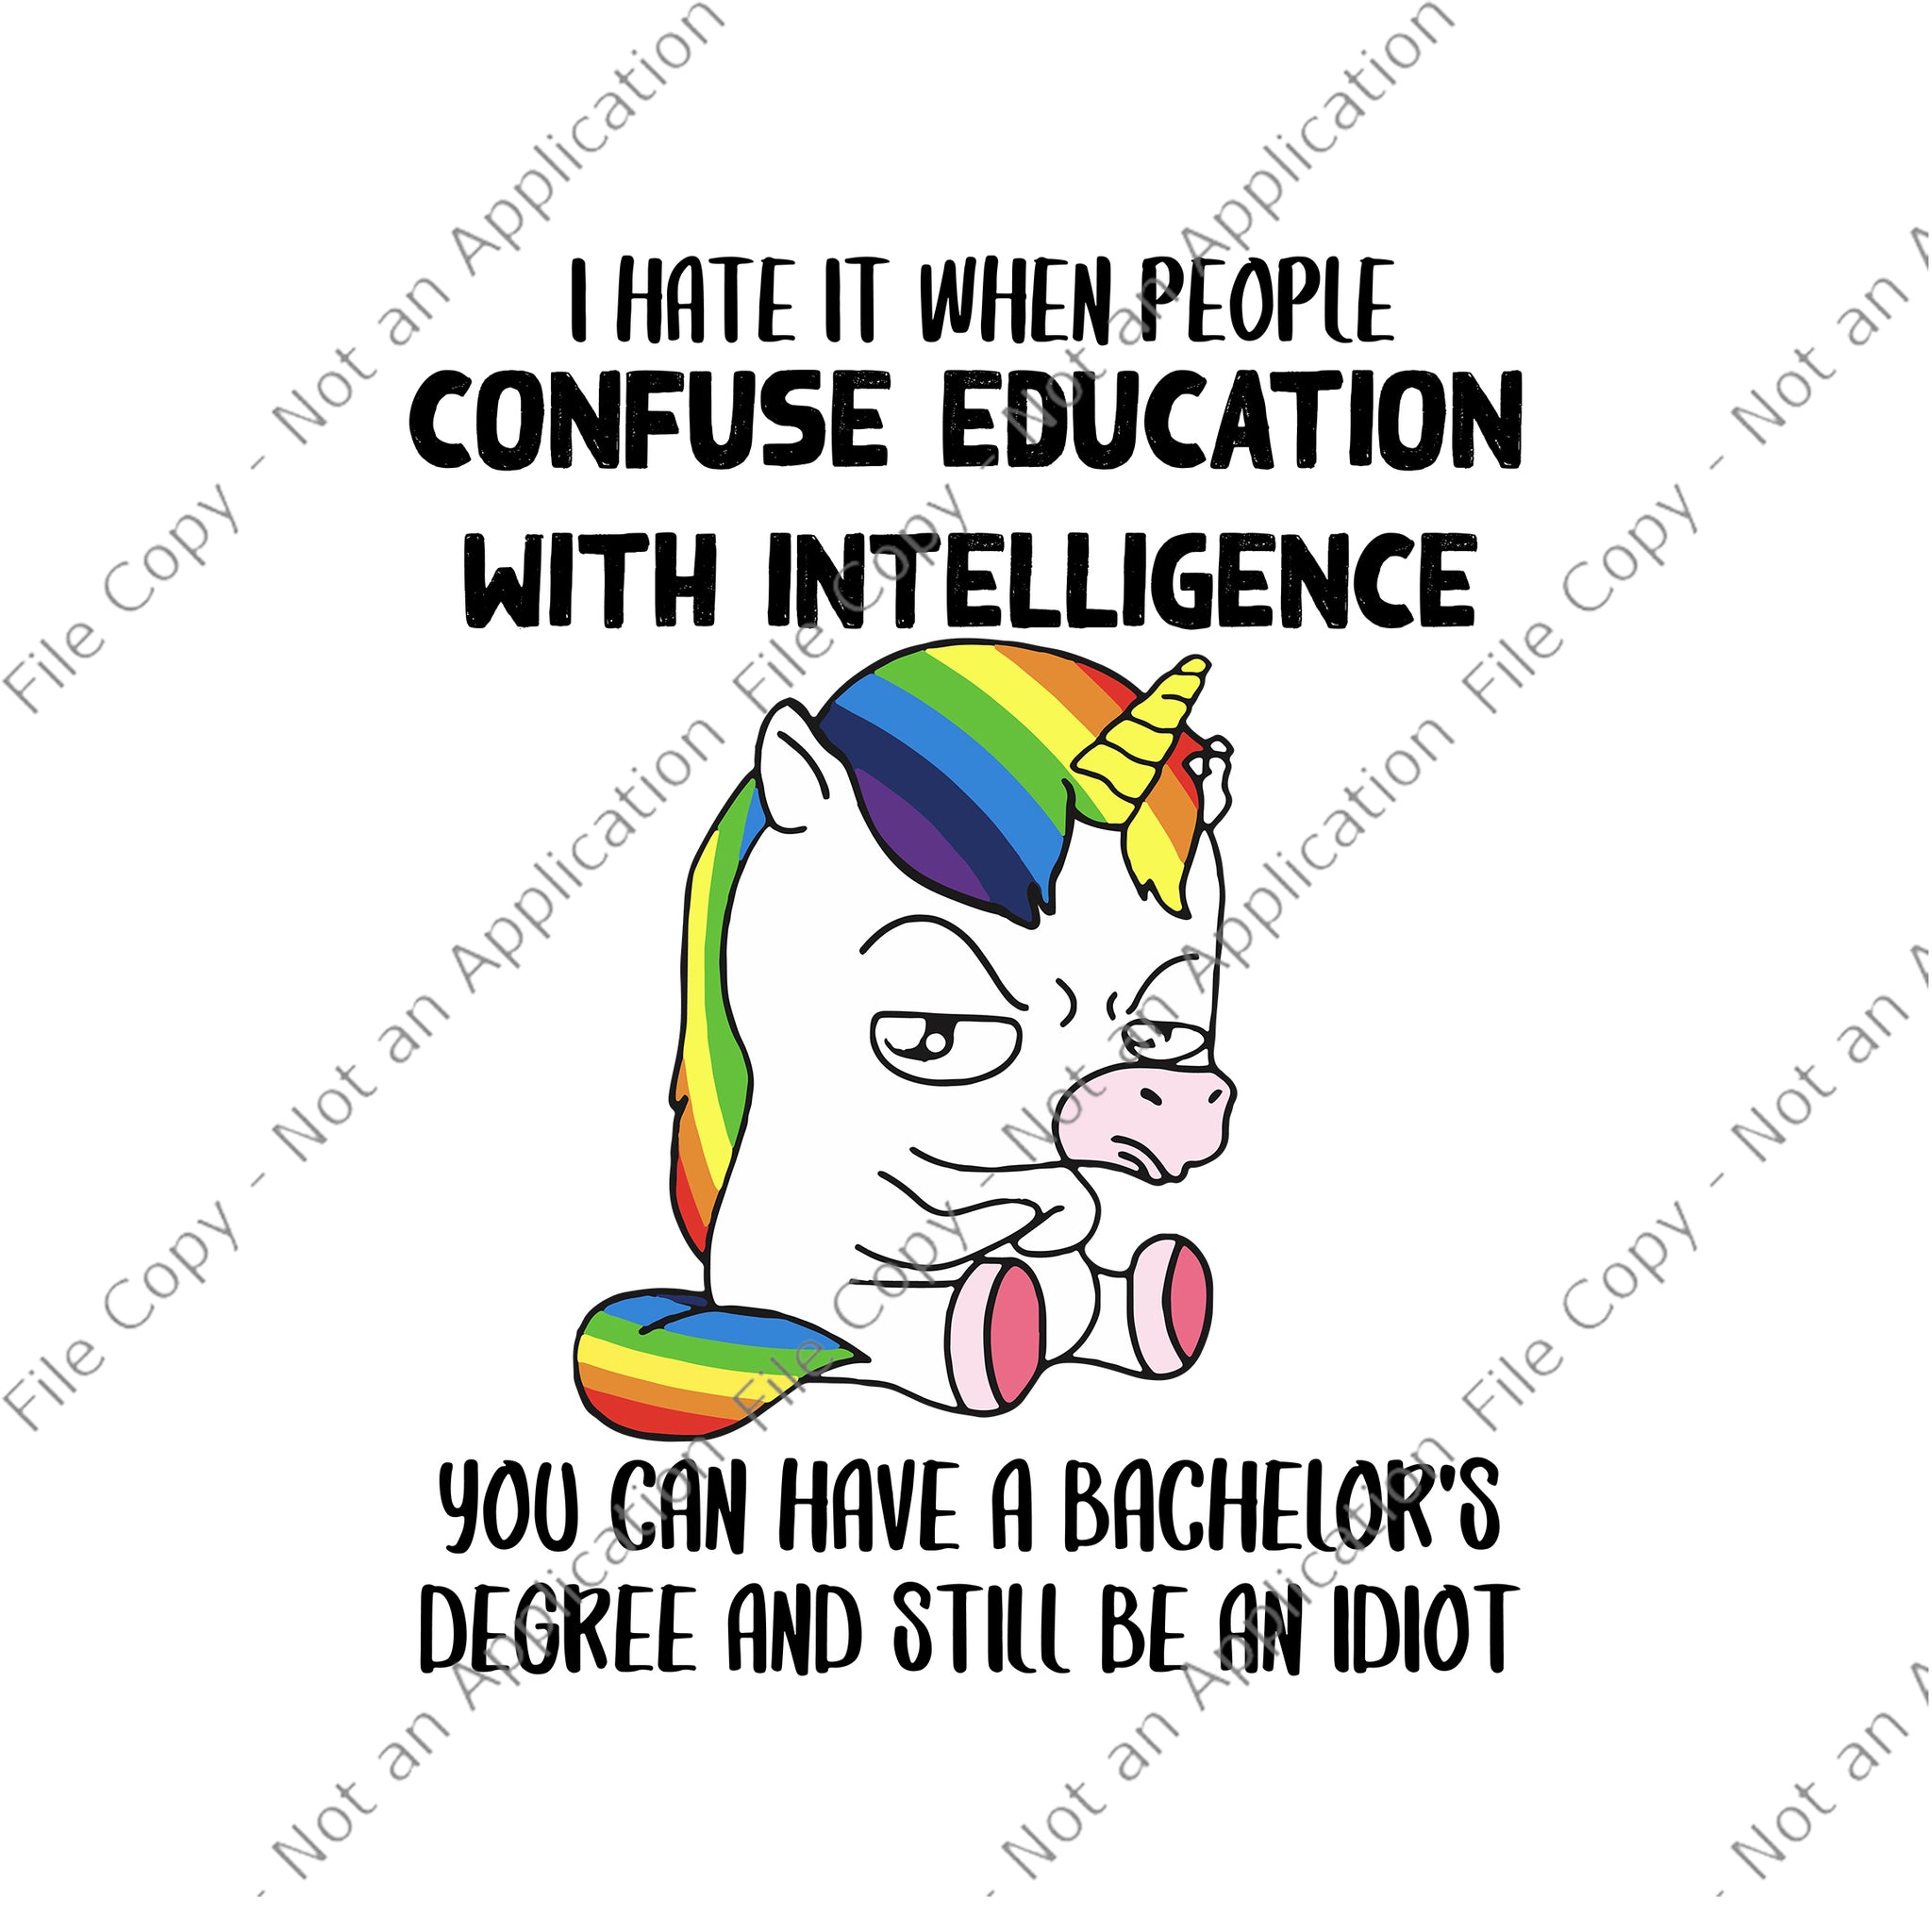 I Hate It When People Confuse Education With Intelligence Svg, You Can Have A Bachelor's Degree And Still Be An Idiot Svg, Unicorn Svg, Funny Unicorn